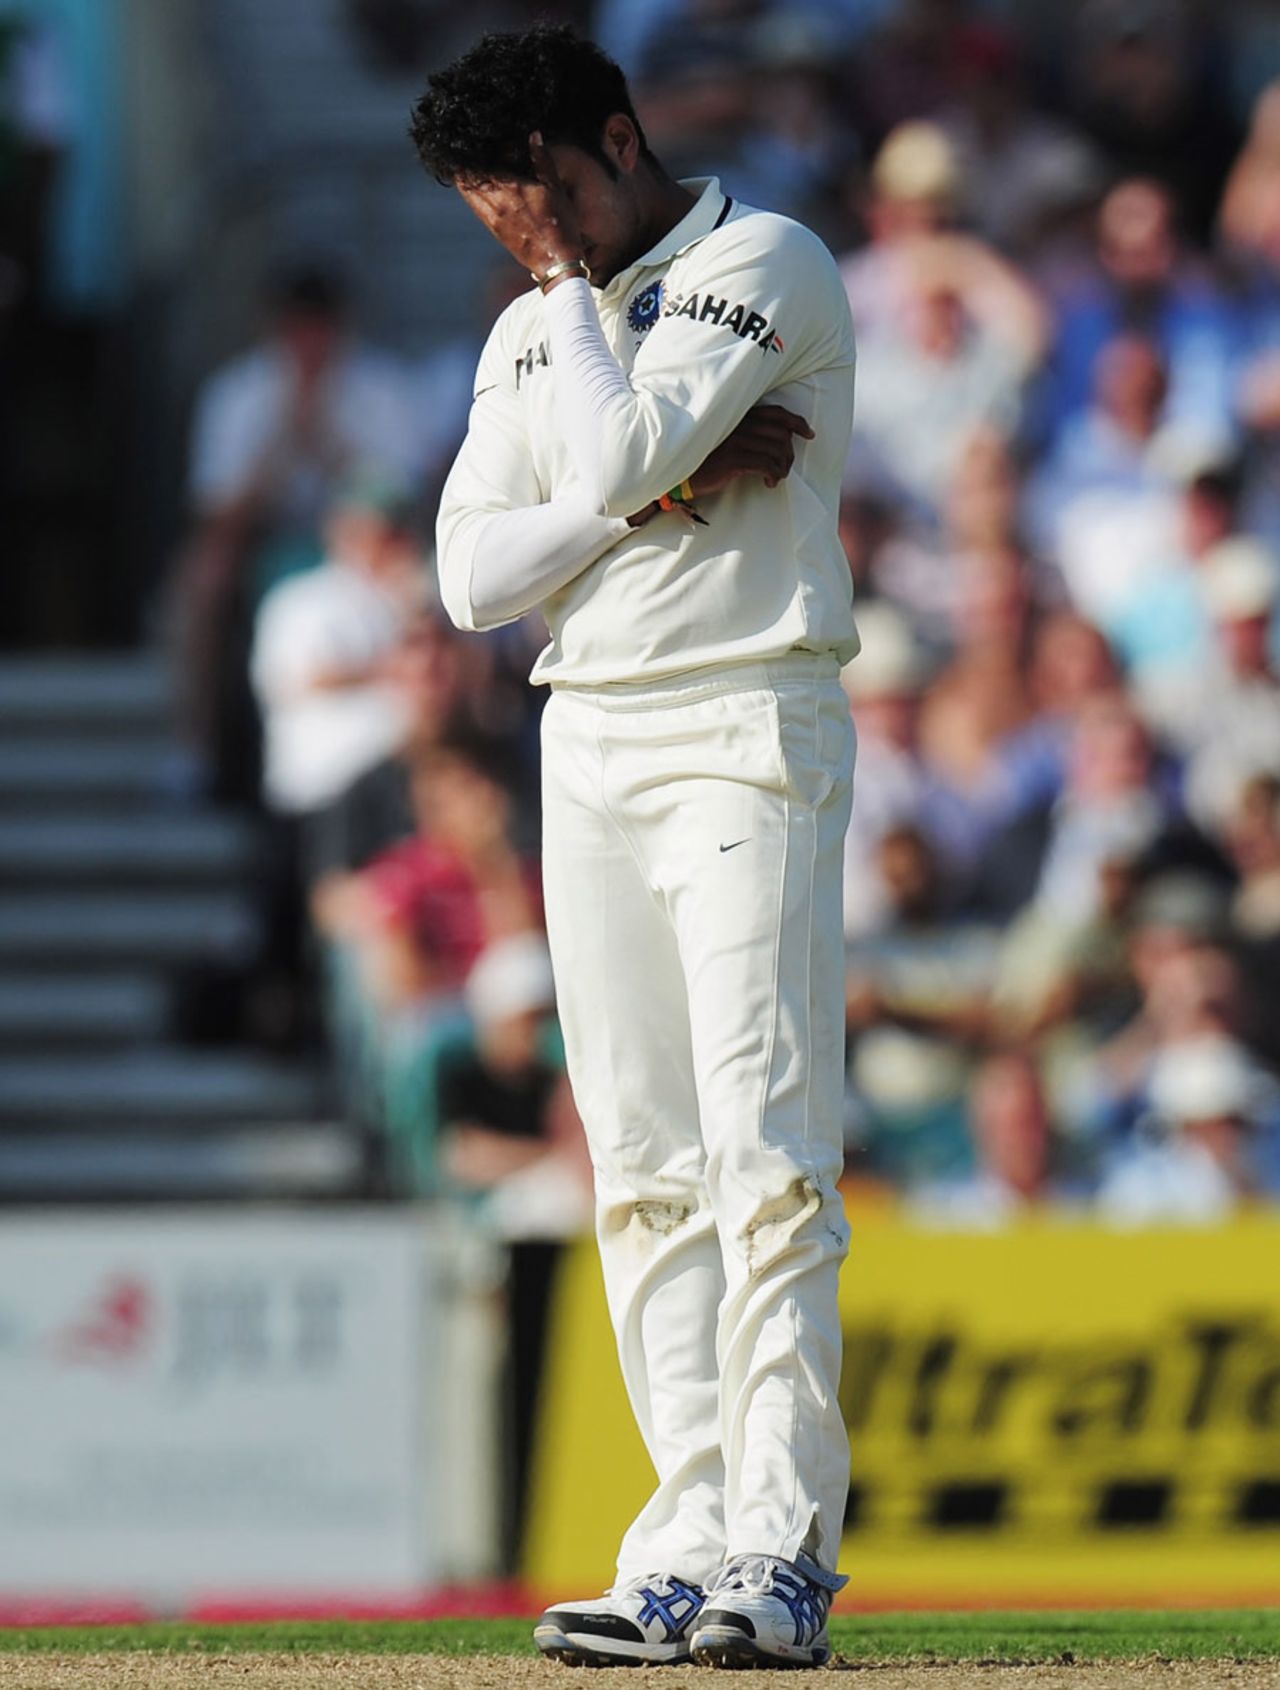 Sreesanth lets his frustration show, England v India, 4th Test, The Oval, 2nd day, August 19, 2011